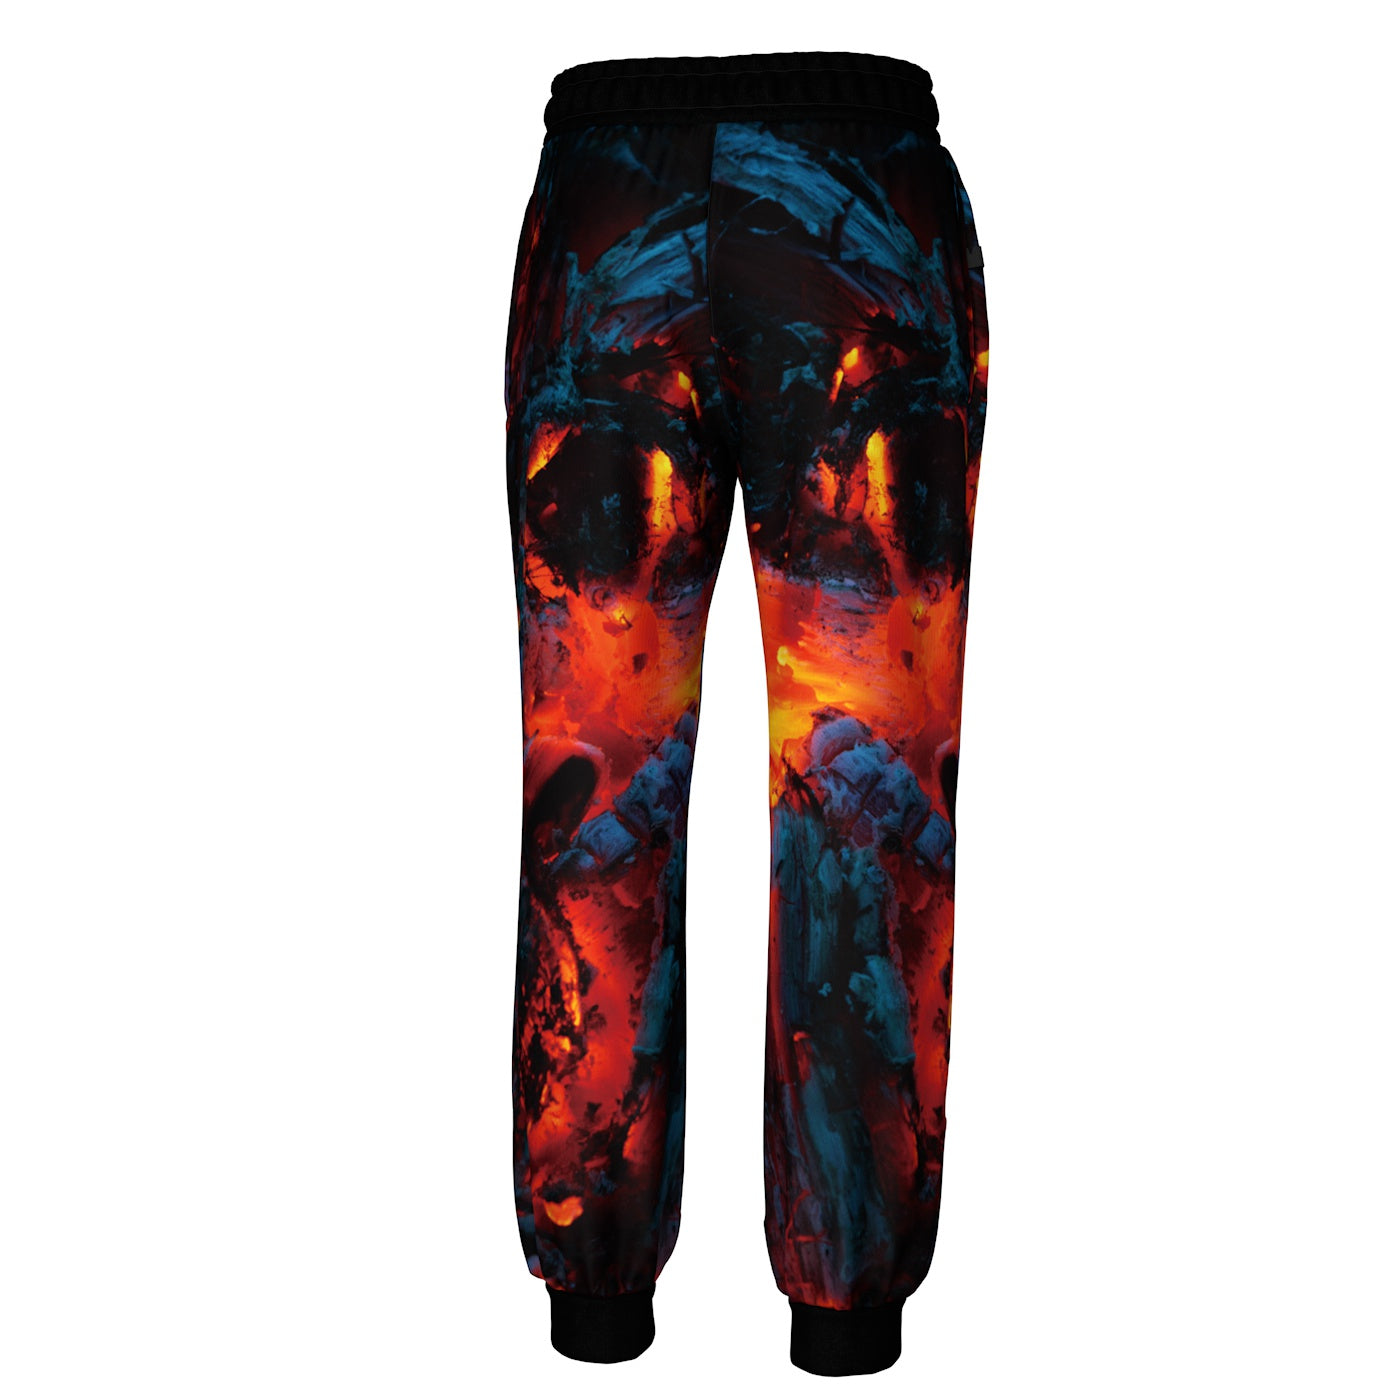 After The Fire Sweatpants